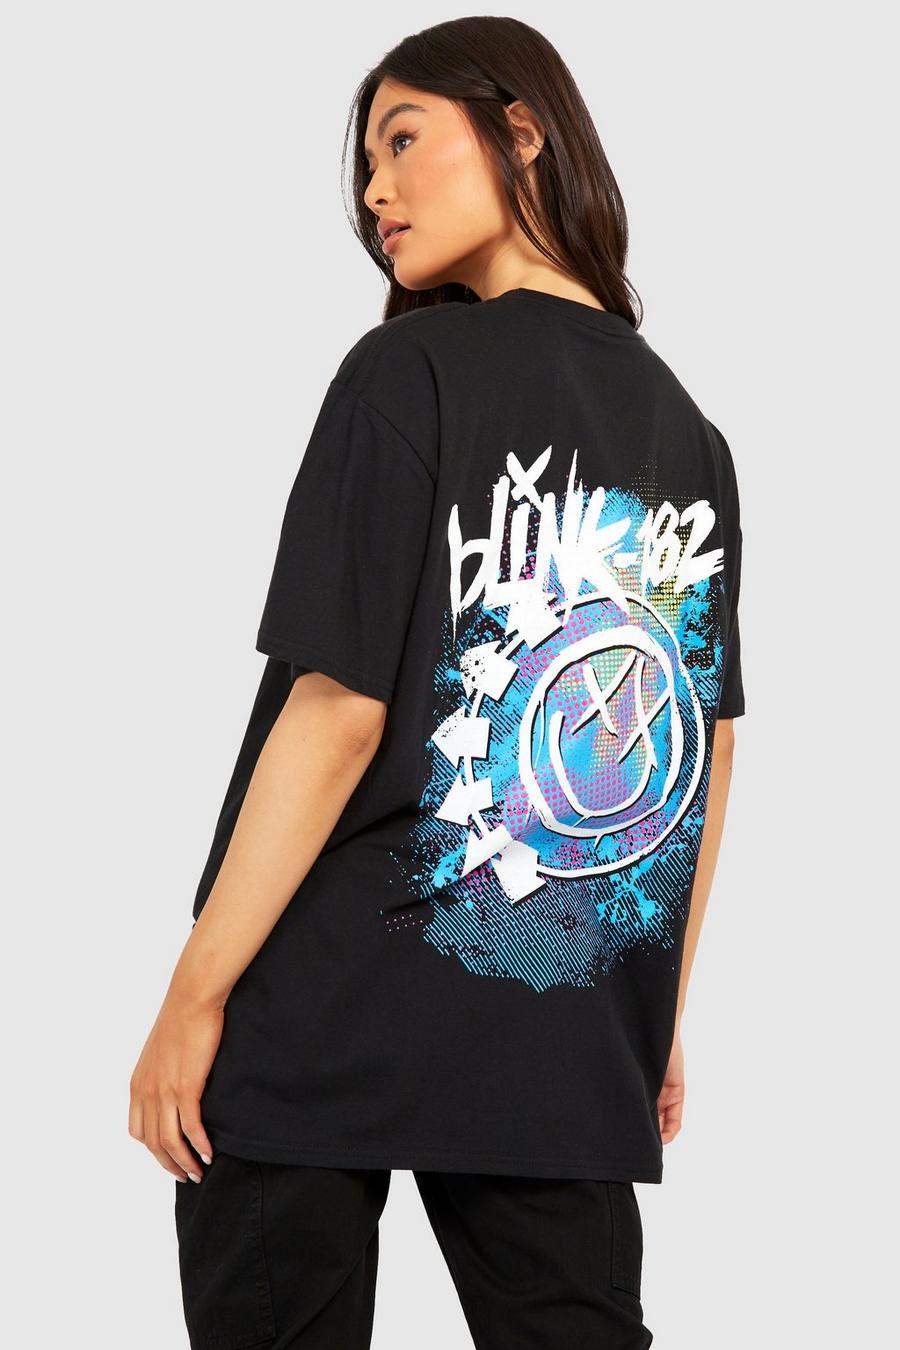 Blink 182 Front And Back Print Band T-shirt